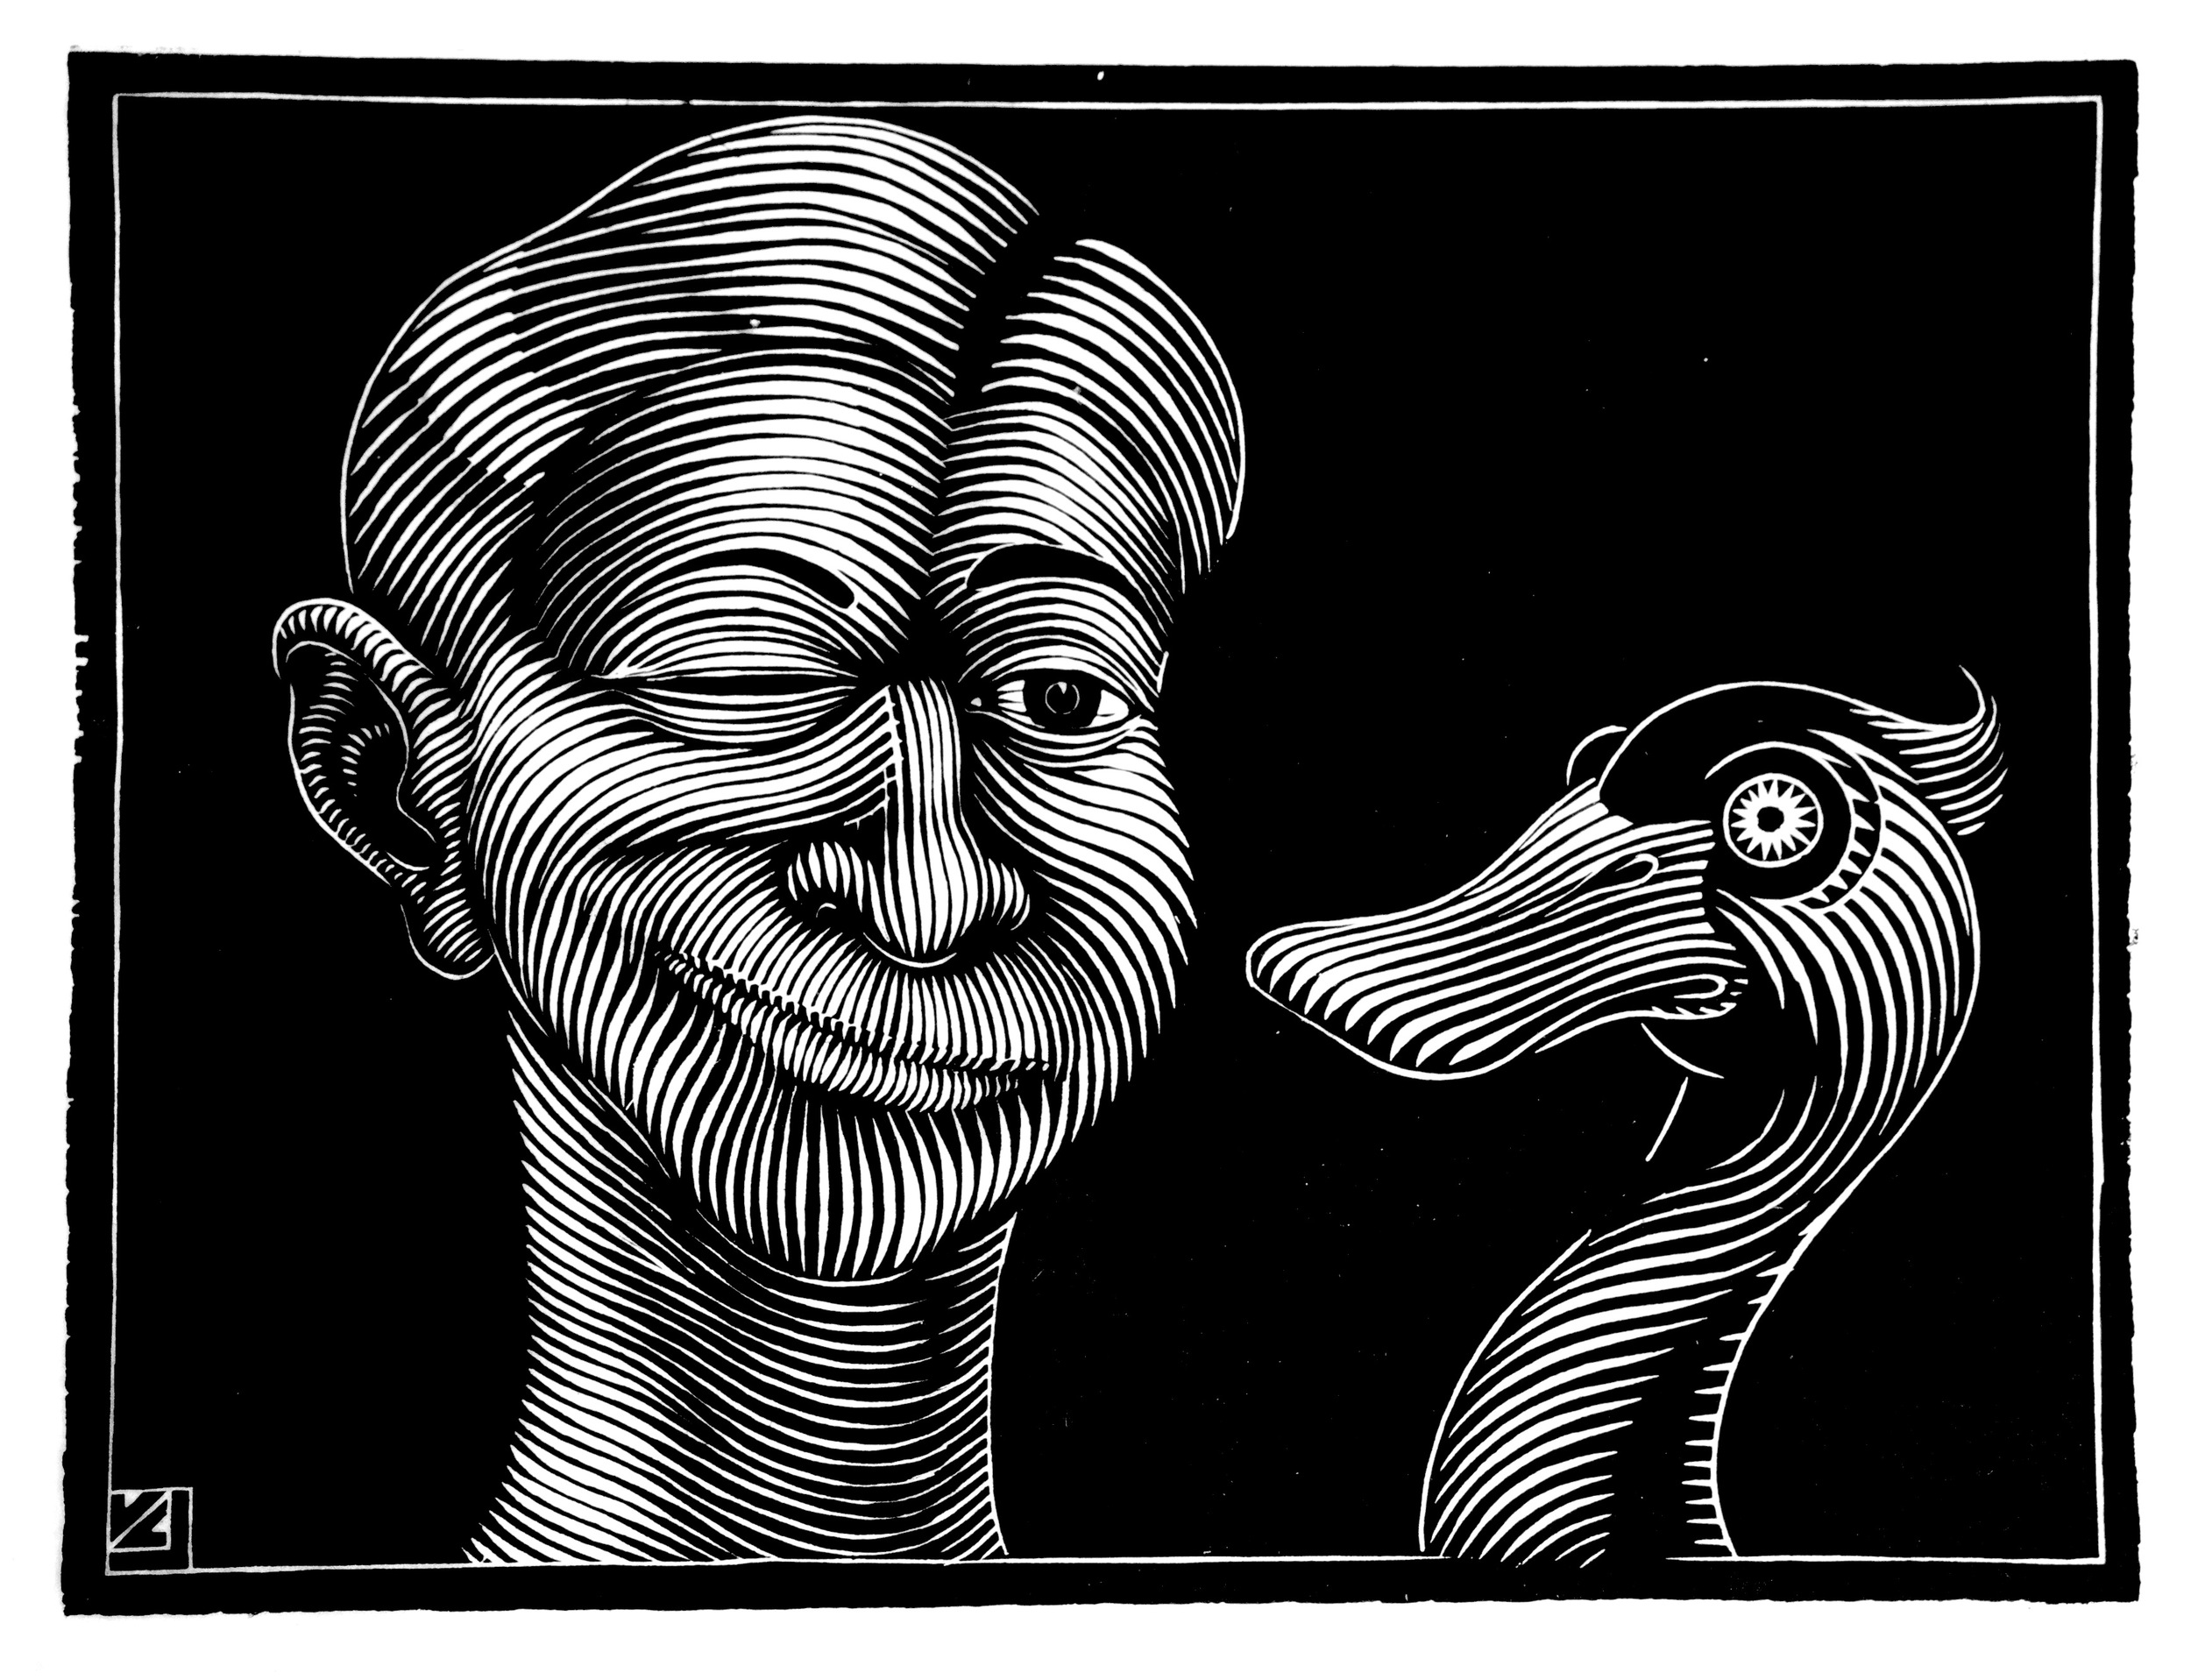 "Man and Duck" by Vernon Courtlandt Johnson. © 1989 VCJ. All rights reserved.